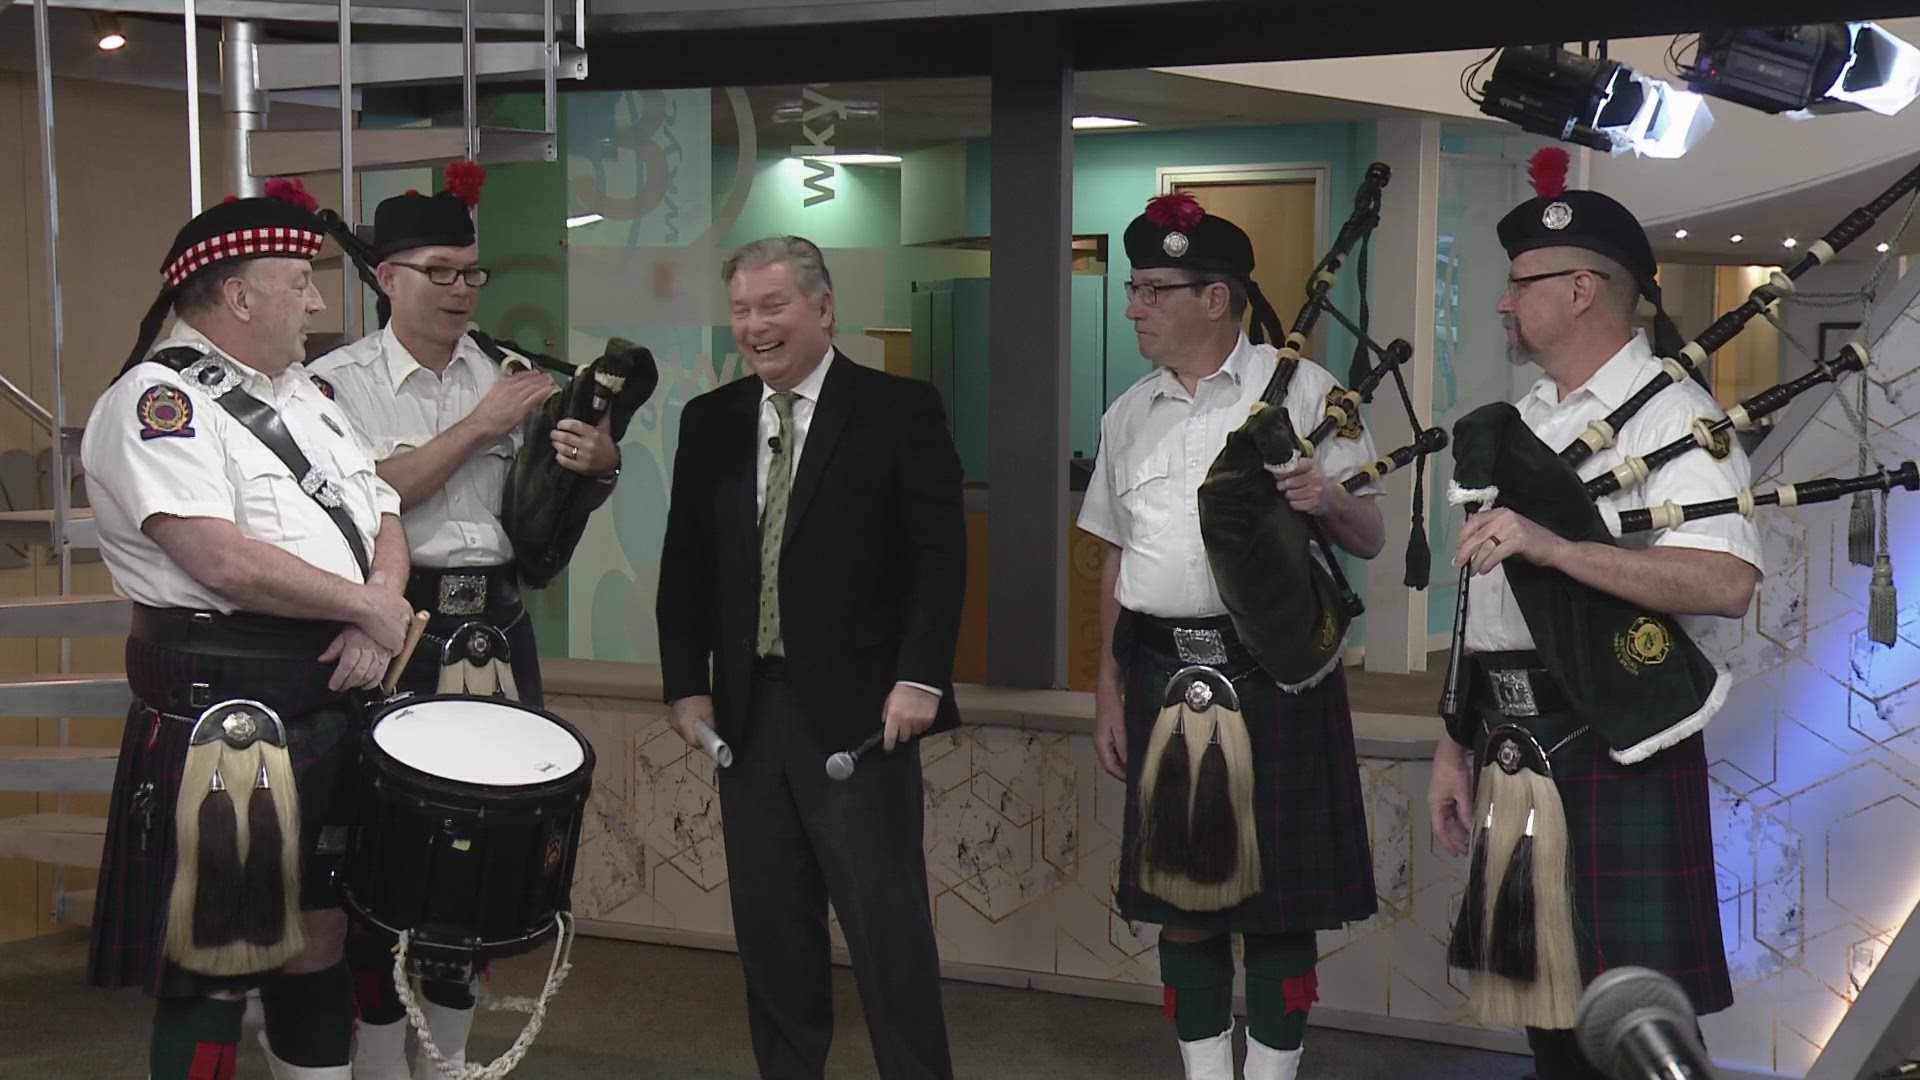 Members of the Burke School of Irish Dance and the Cleveland Firefighters Memorial Pipes and Drums joined Jim Donovan and Laura Caso on Thursday.